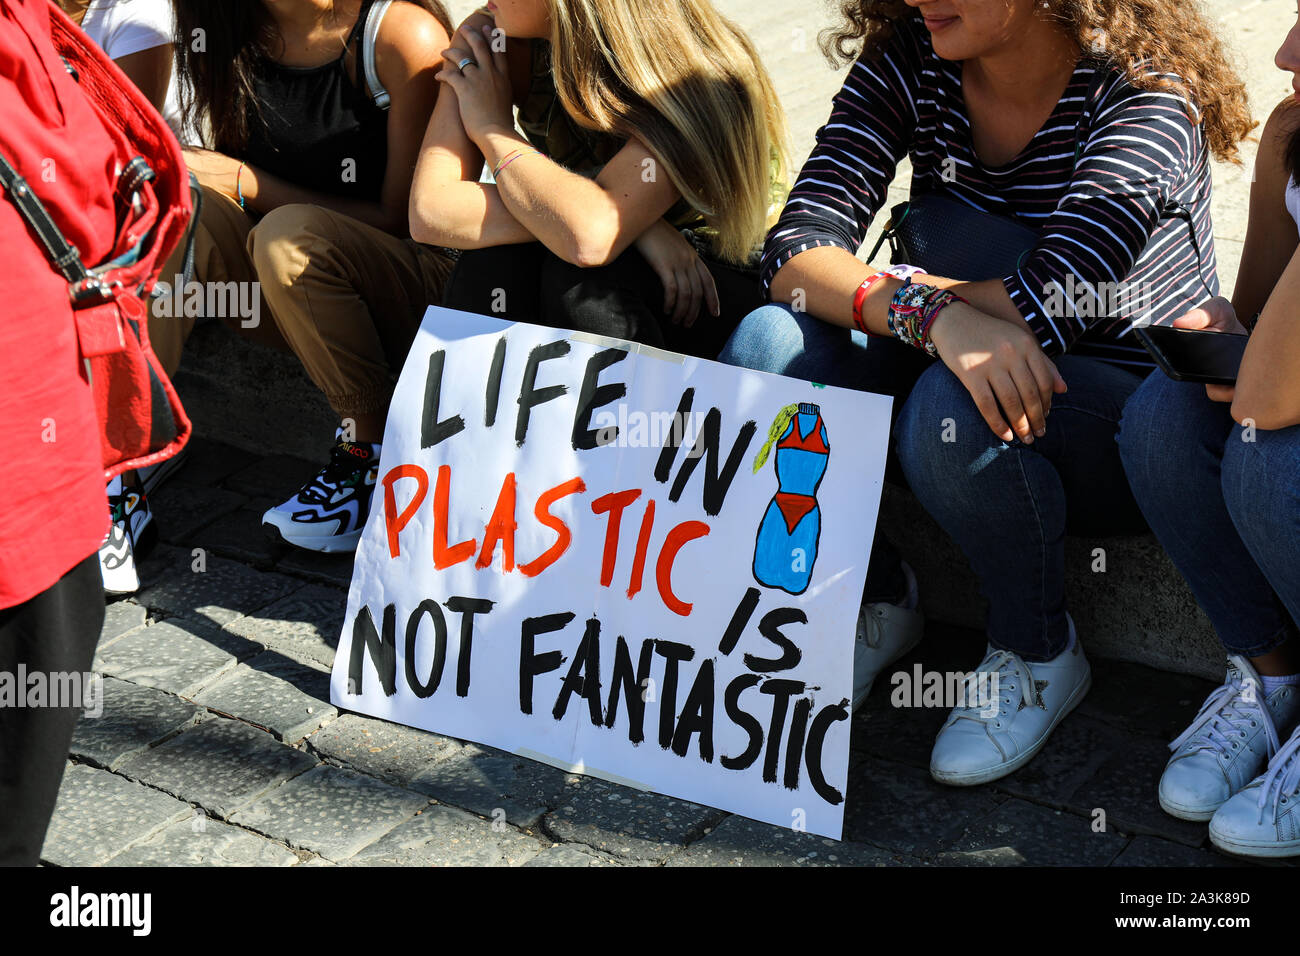 'Life in plastic is not fantastic' -placard. Fridays for future. School strike for climate. 27 Sep 2019. Rome, Italy. Stock Photo